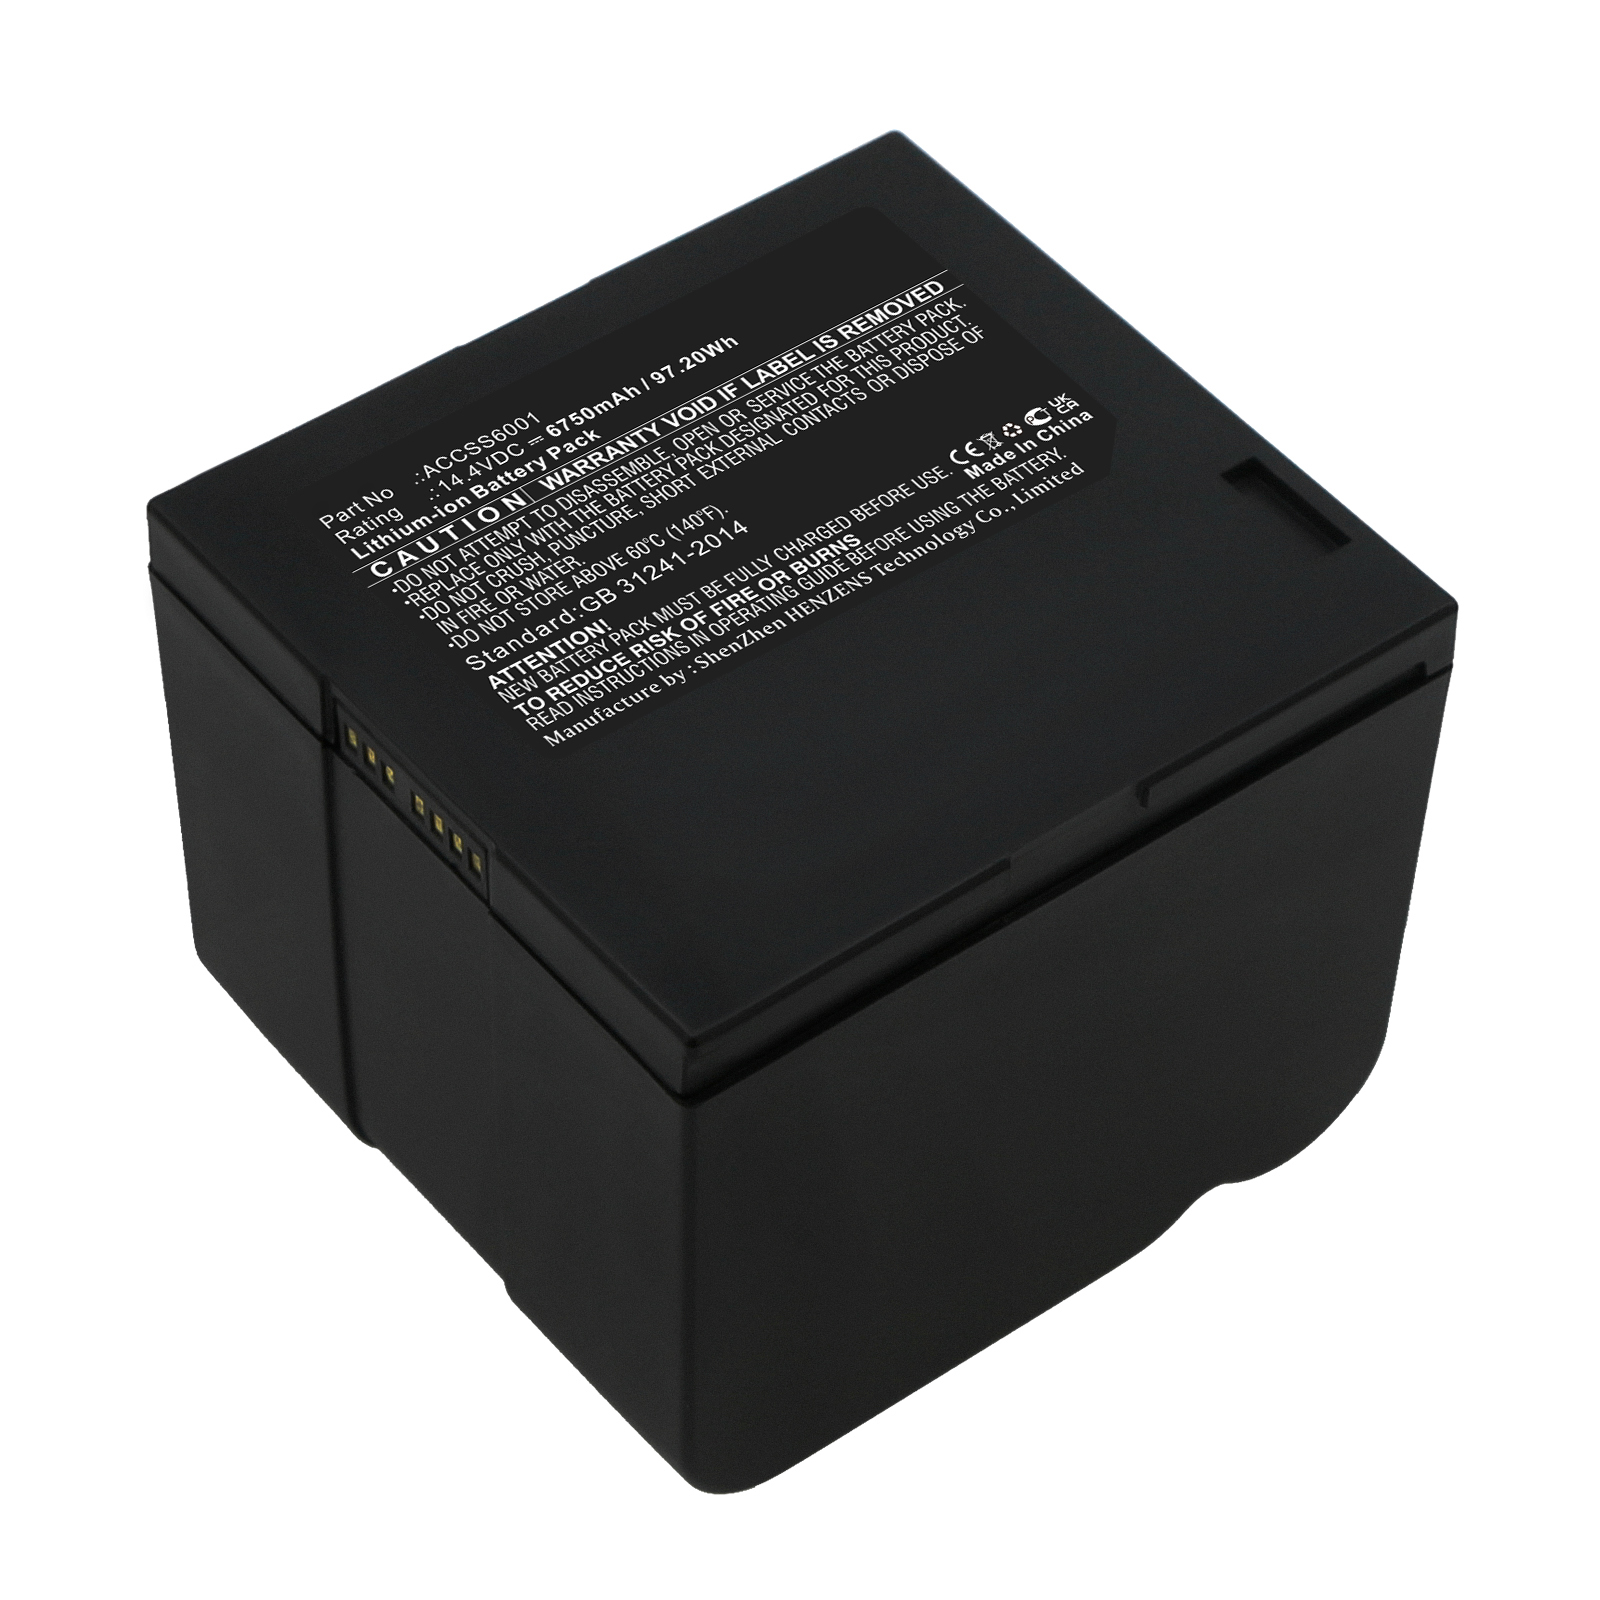 Synergy Digital Equipment Battery, Compatible with Trimble ACCSS6001 Equipment Battery (Li-ion, 14.4V, 6750mAh)